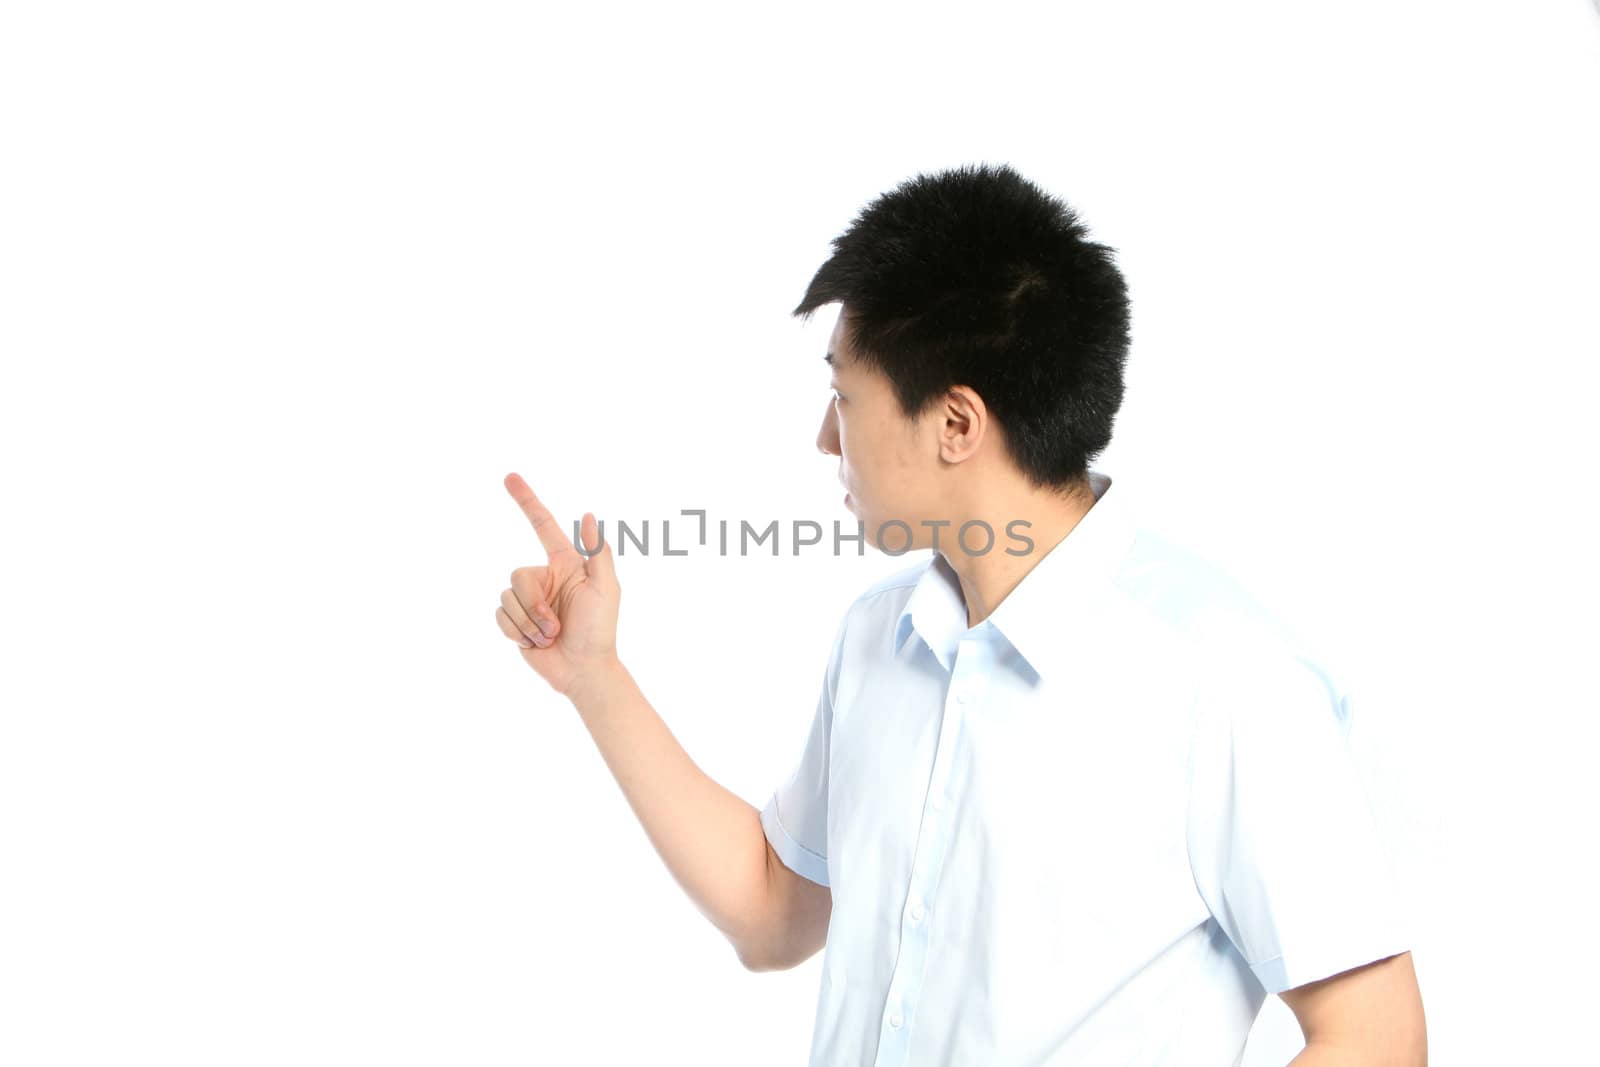 Young Asian man in shirtsleeves turned away from the camera pointing behind him towards blank white copy space